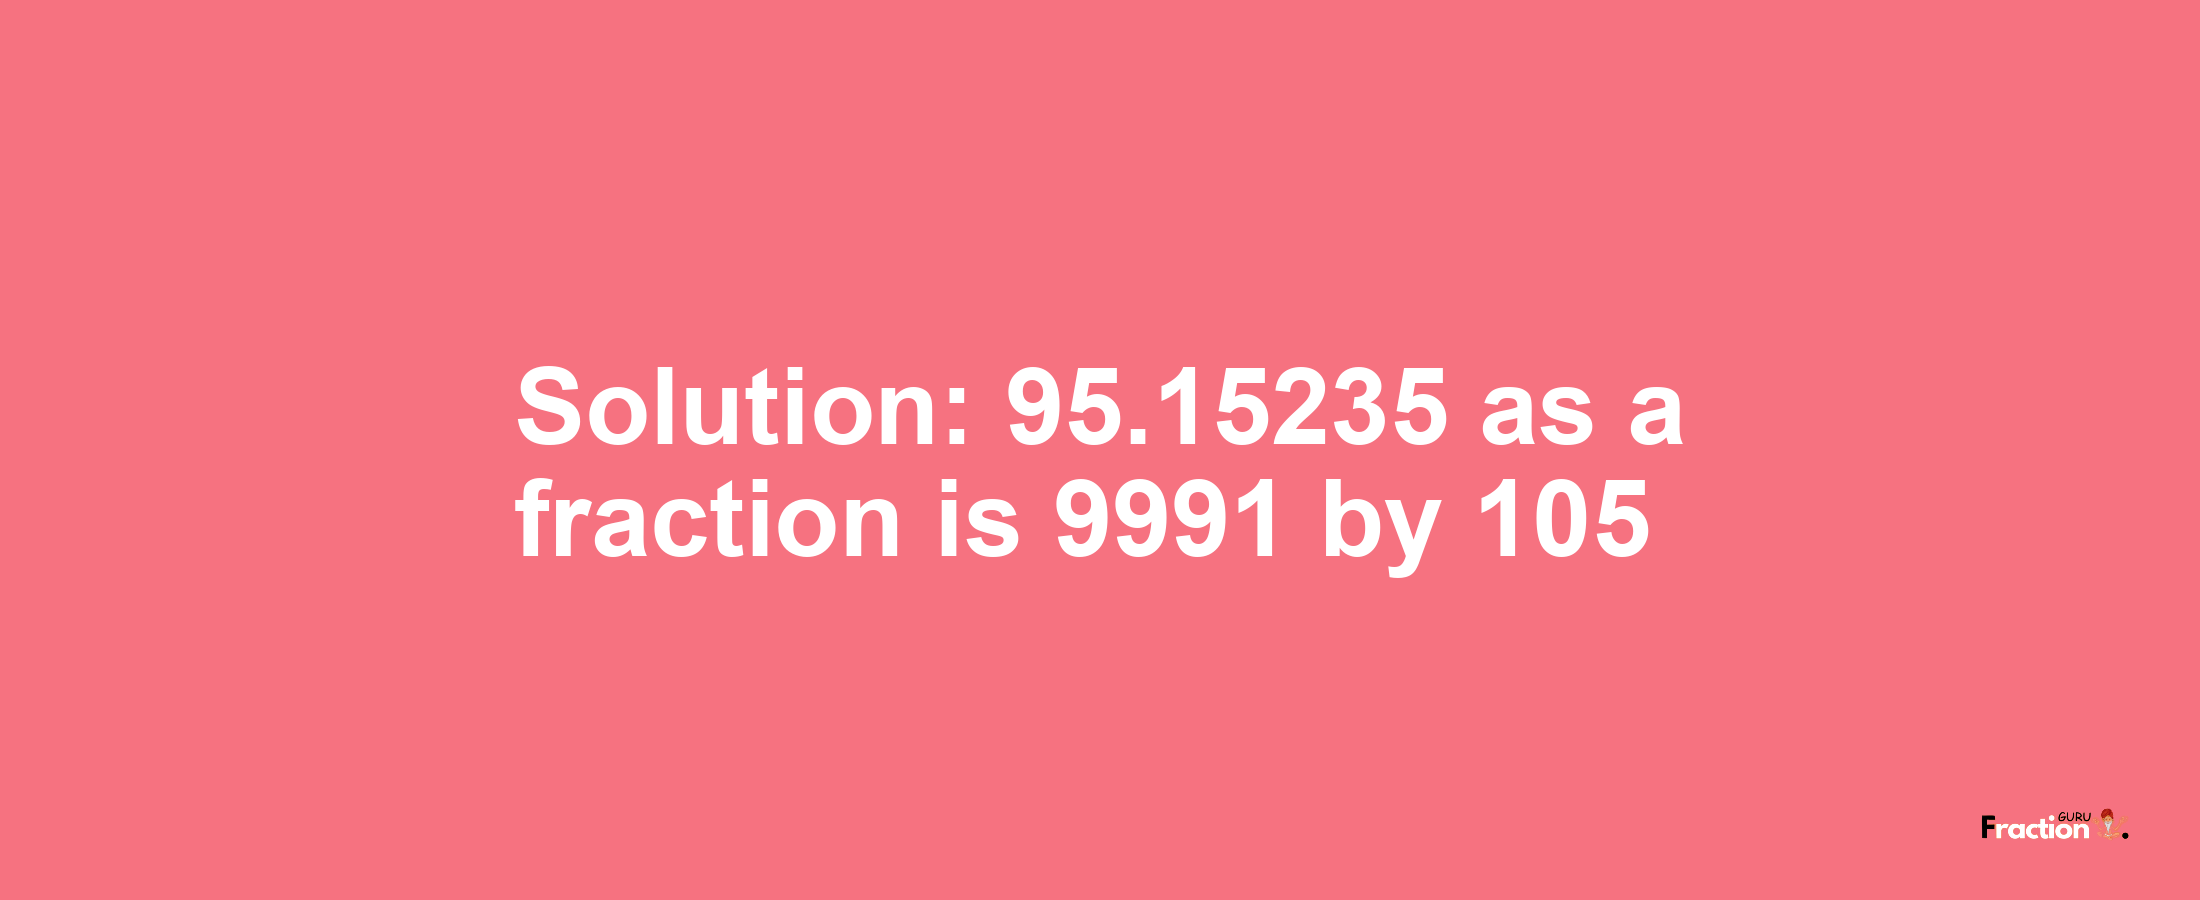 Solution:95.15235 as a fraction is 9991/105